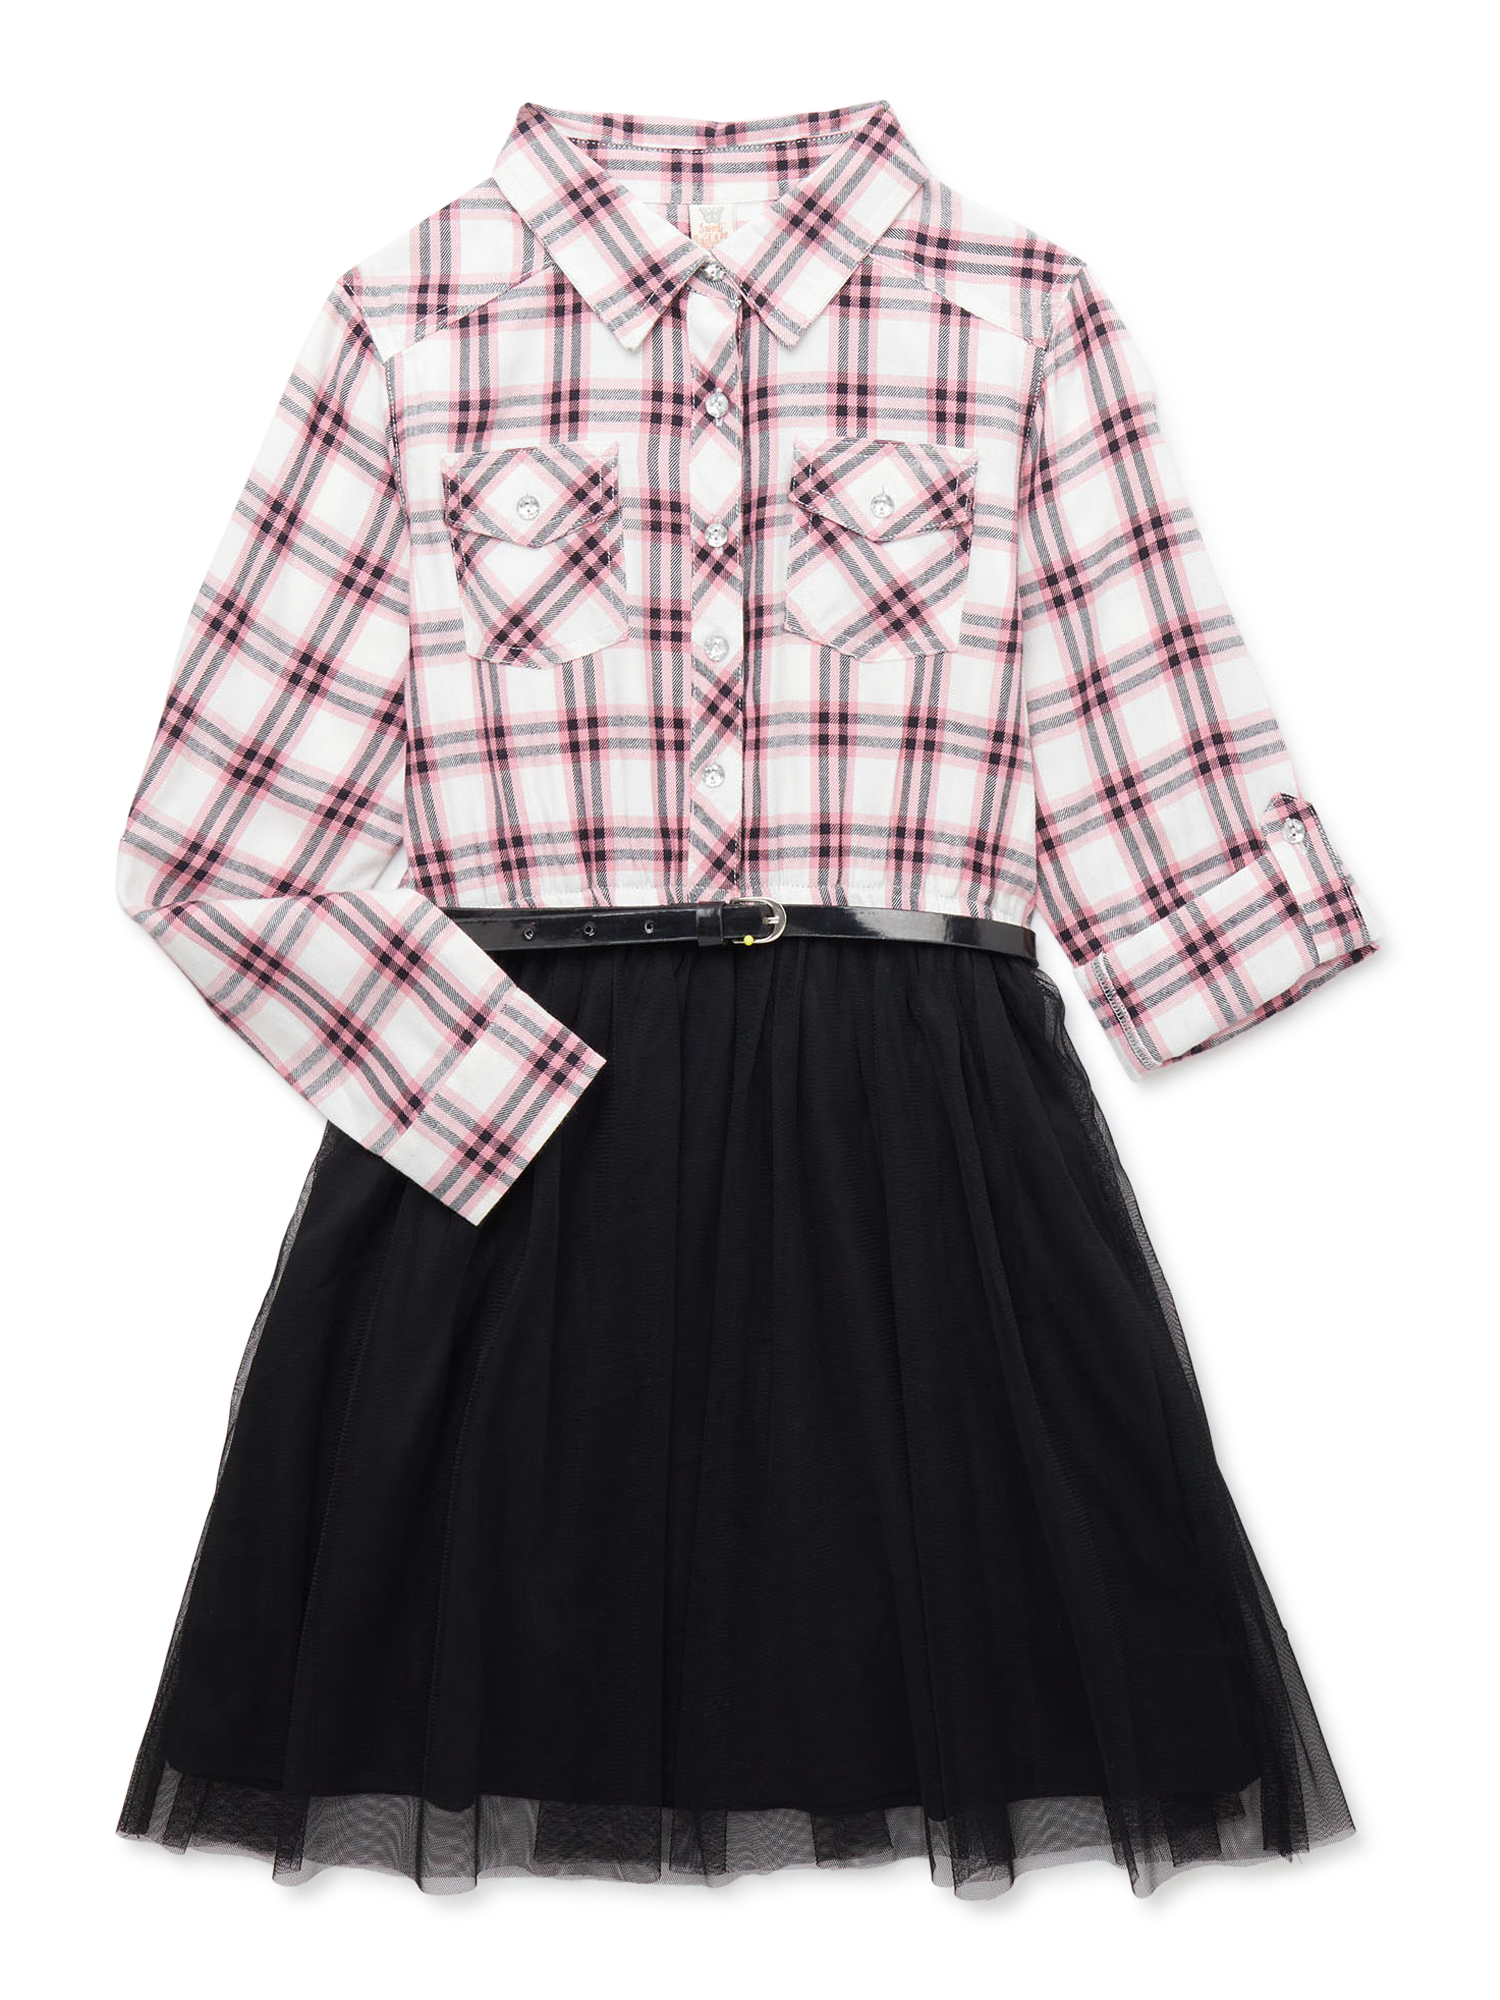 Sweet Butterfly Girls Long Sleeve Plaid and Tulle Dress, Sizes 4-16 - image 1 of 3